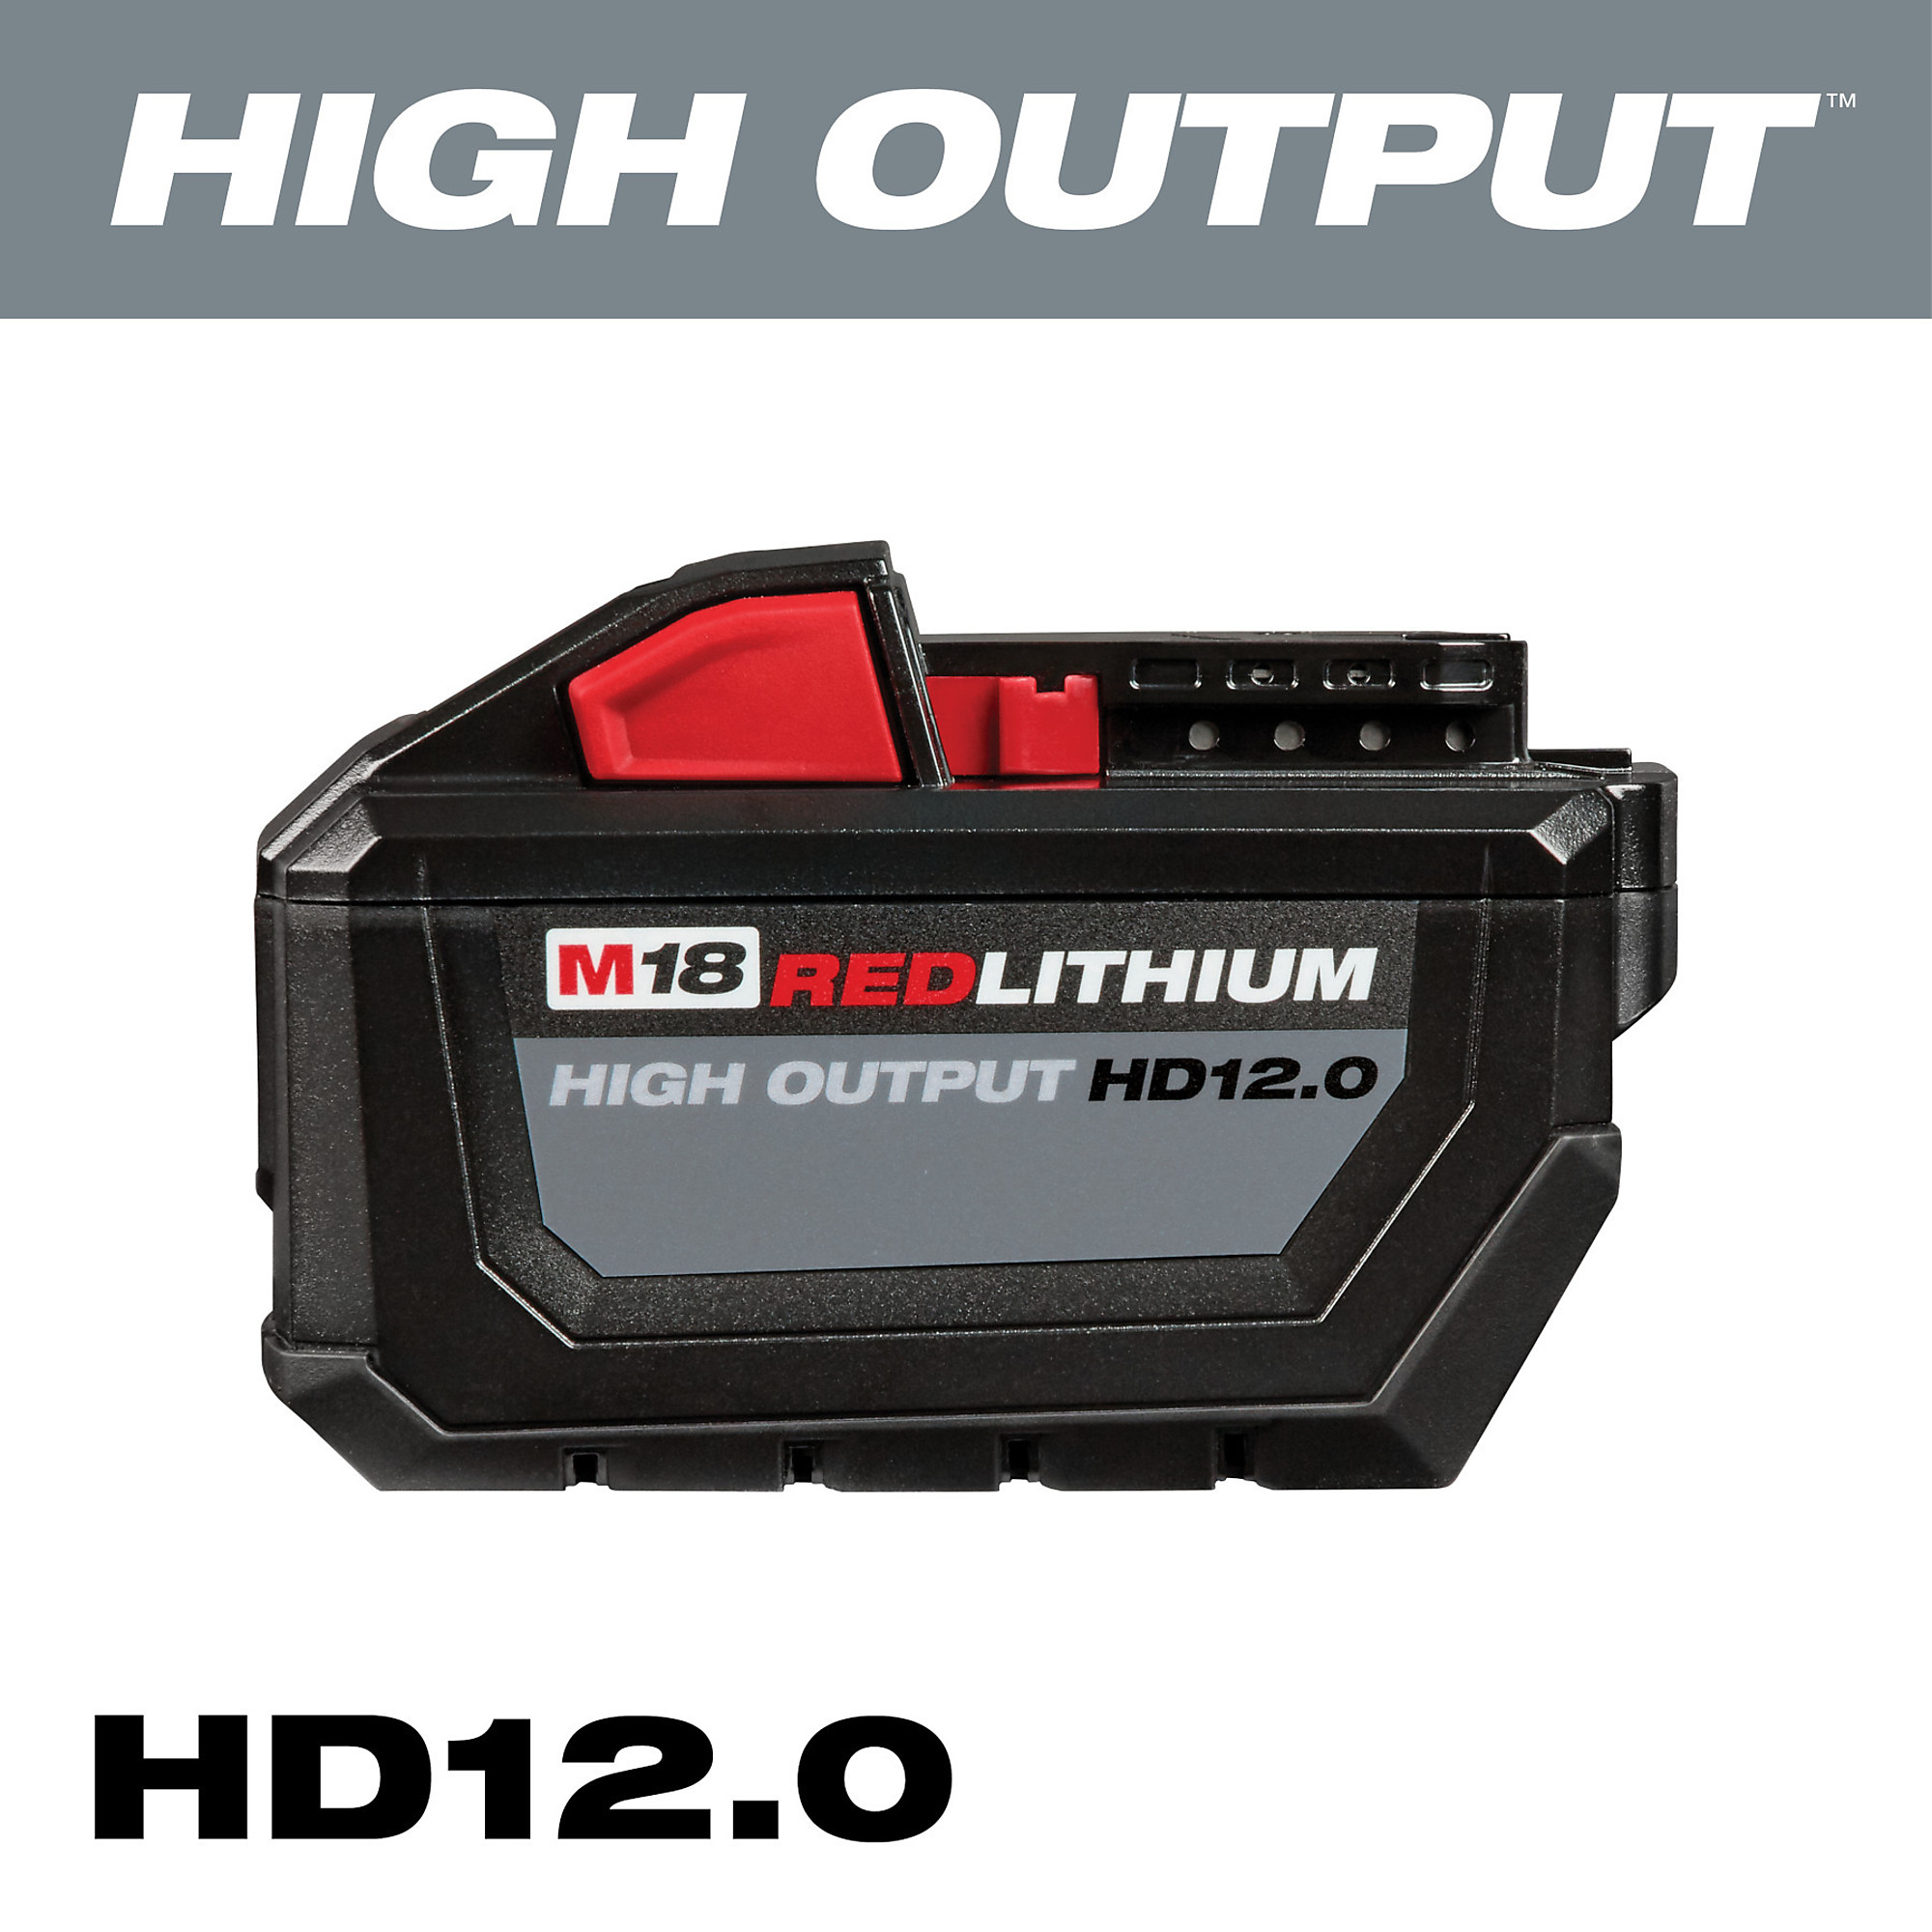 M18 REDLITHIUM High Output HD12.0 Battery Pack, 12Ah, Model - Milwaukee 48-11-1812